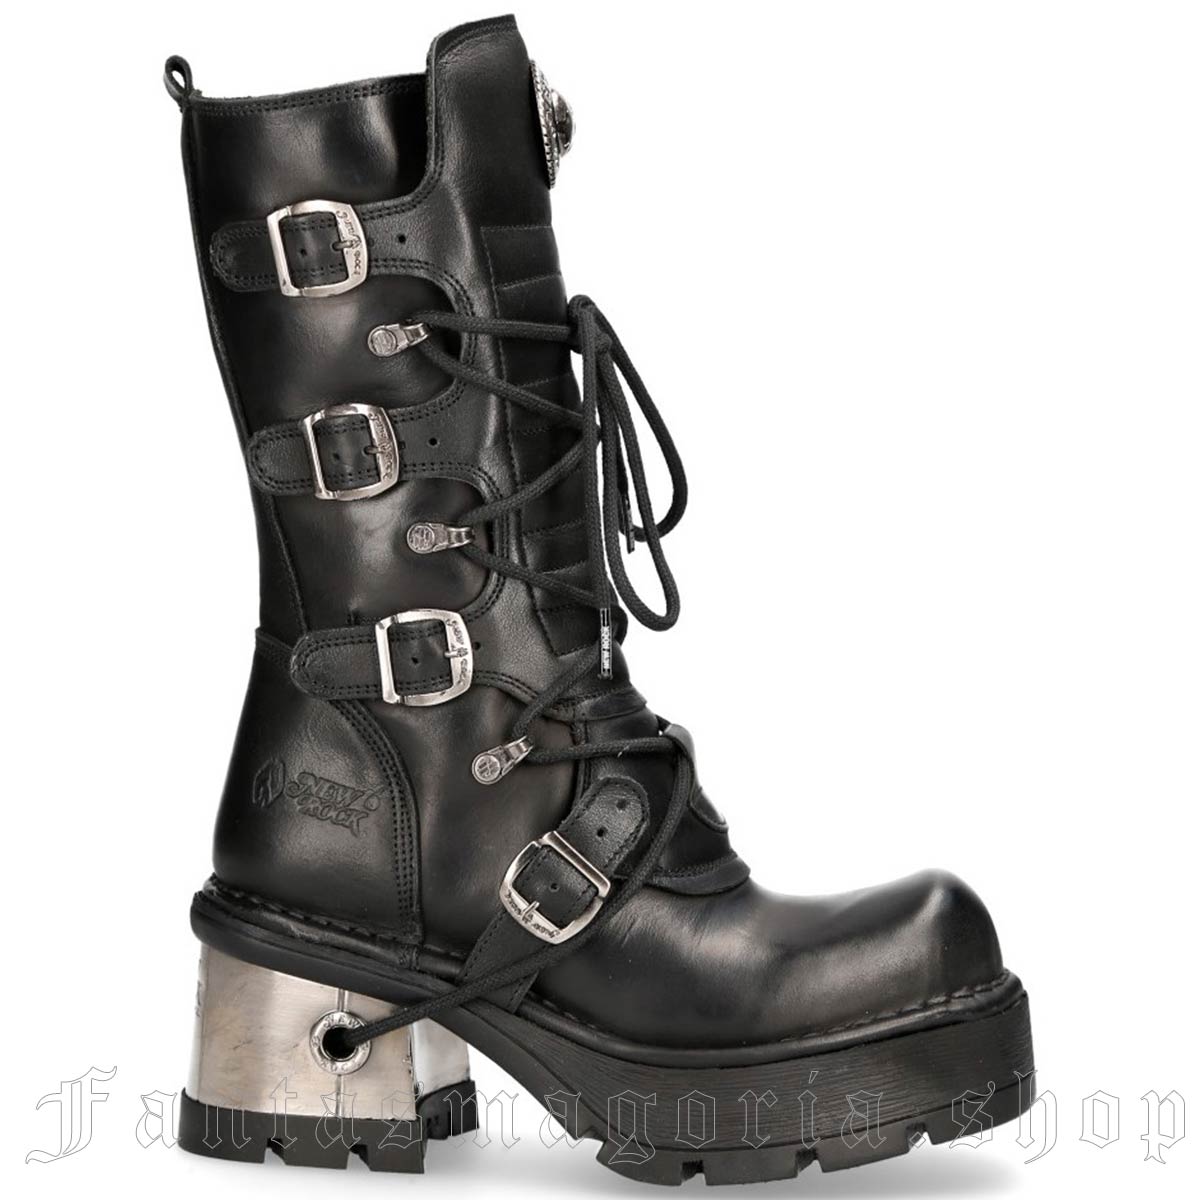 Punk chunky metallic heel black natural leather buckled combat boots. - New Rock - M-373-S33